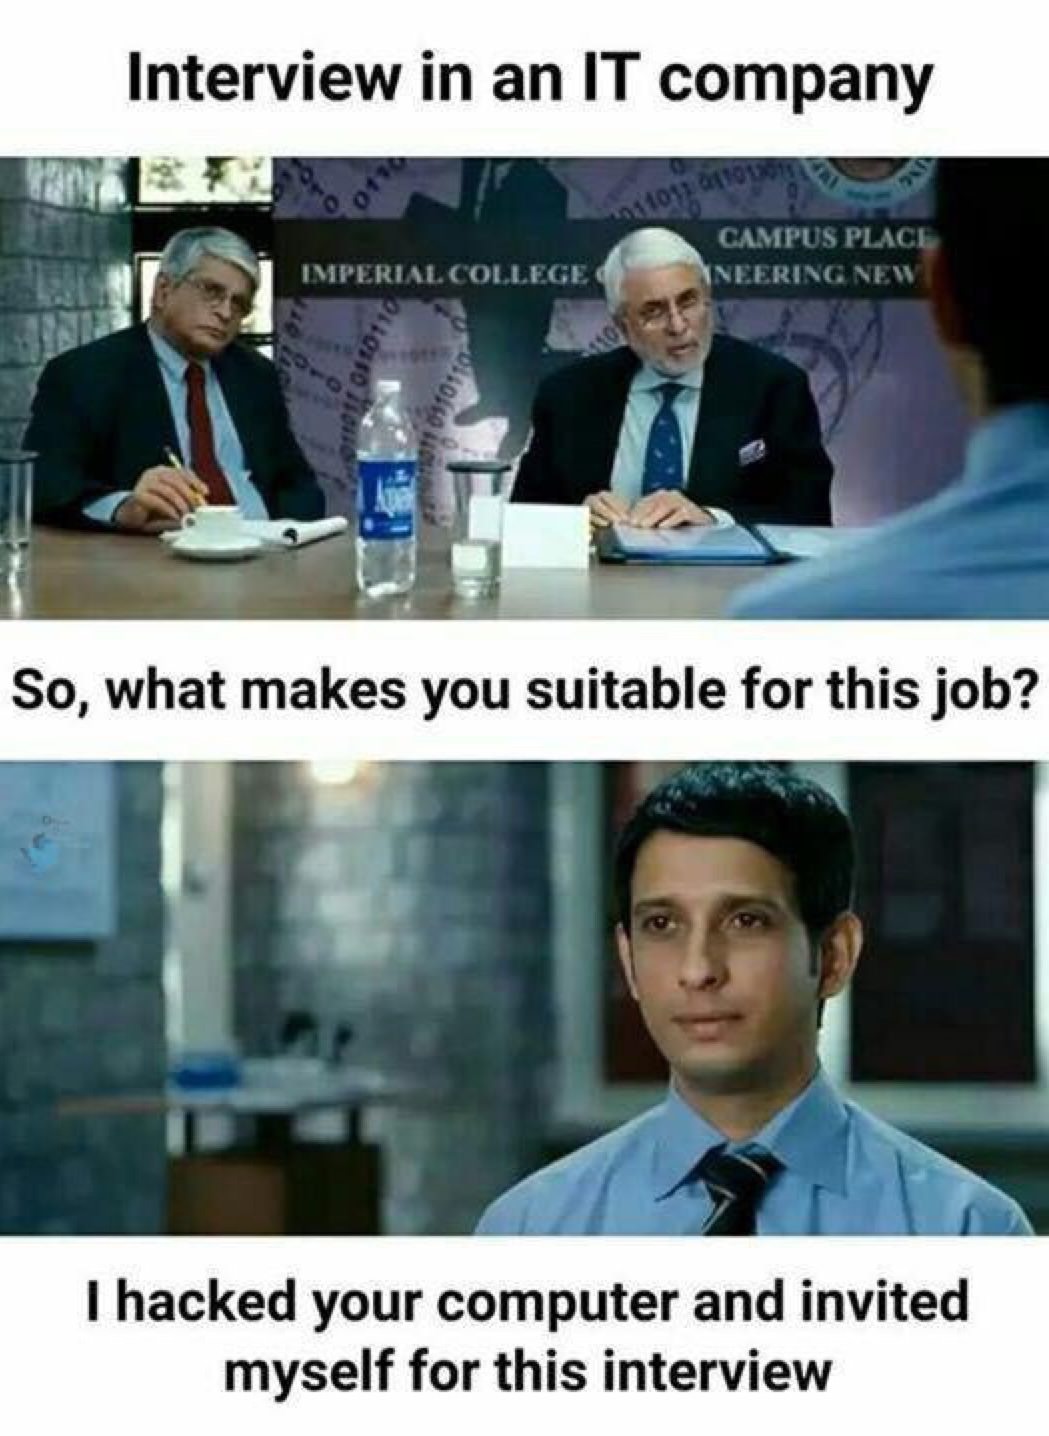 hacker job interview meme - Interview in an It company 1011 Imperial College Campus Place Neering New So, what makes you suitable for this job? I hacked your computer and invited myself for this interview